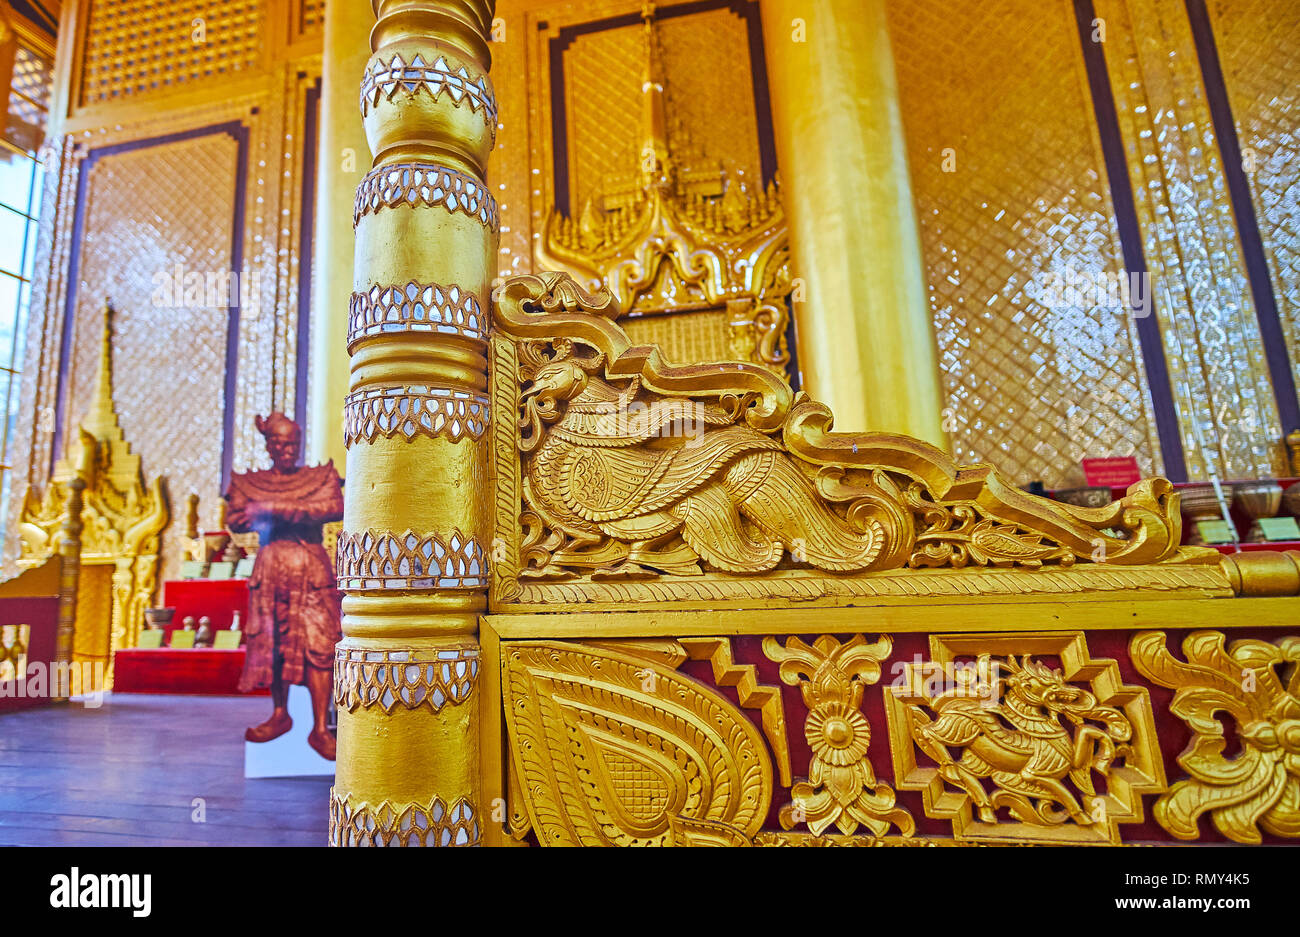 BAGO, MYANMAR - FEBRUARY 15, 2018: The carved decors of Lion (Thihathana) Throne Hall in Kanbawzathadi Golden palace with mirror elements and gilding, Stock Photo